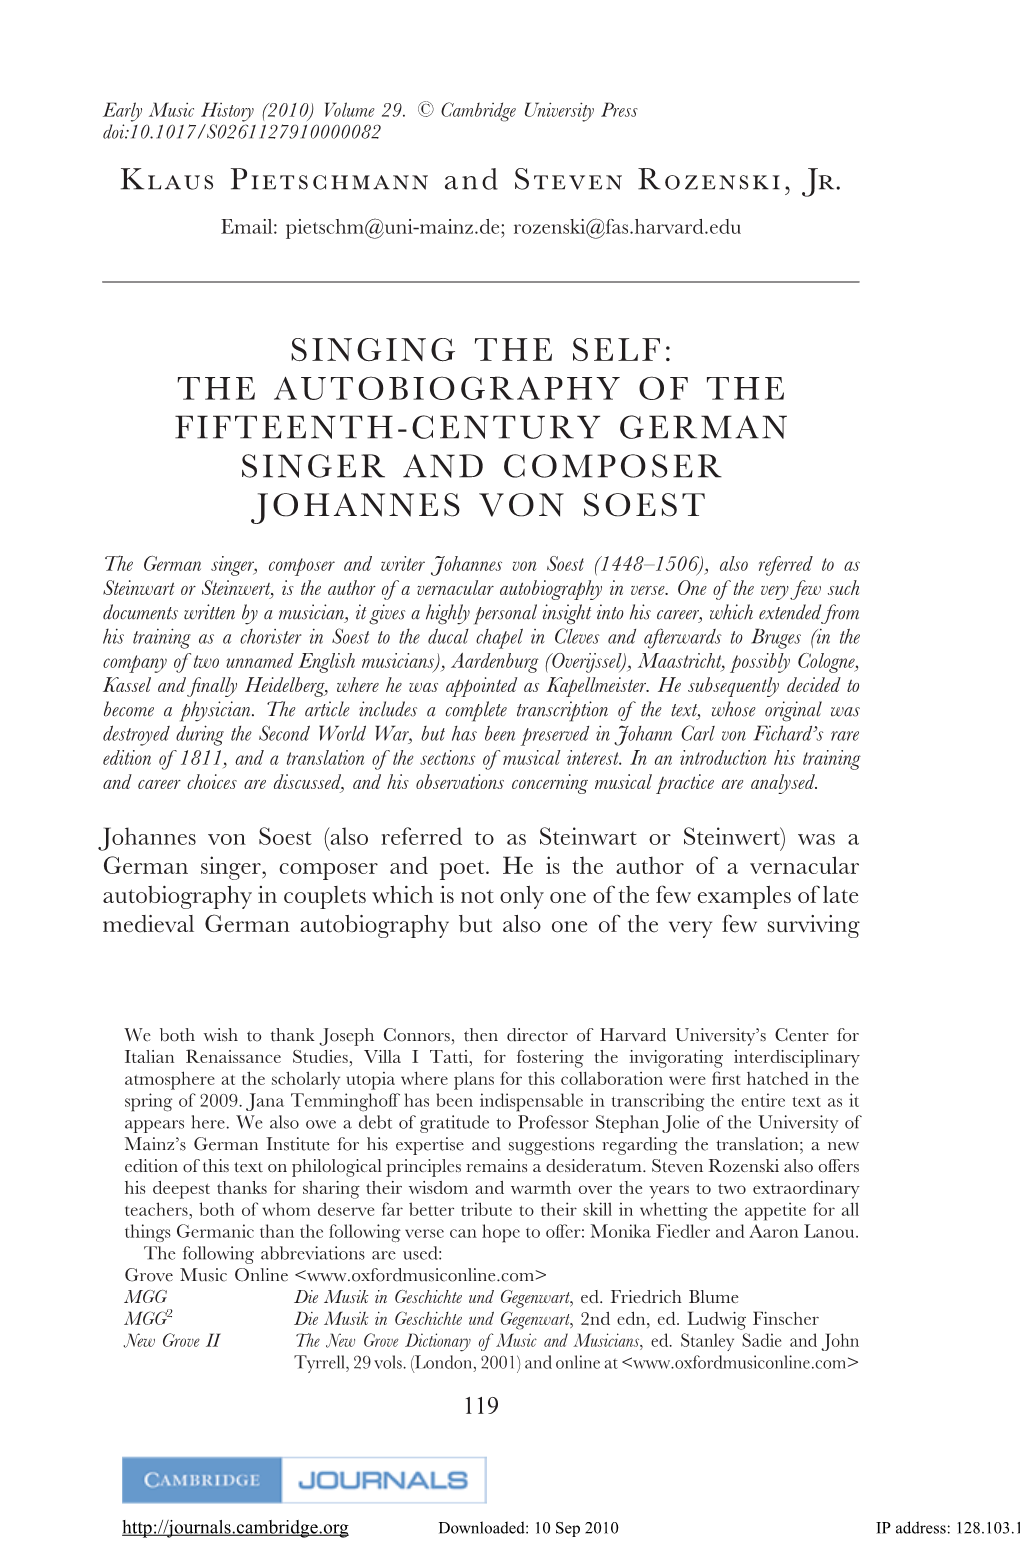 Singing the Self: the Autobiography of the Fifteenth-Century German Singer and Composer Johannes Von Soest